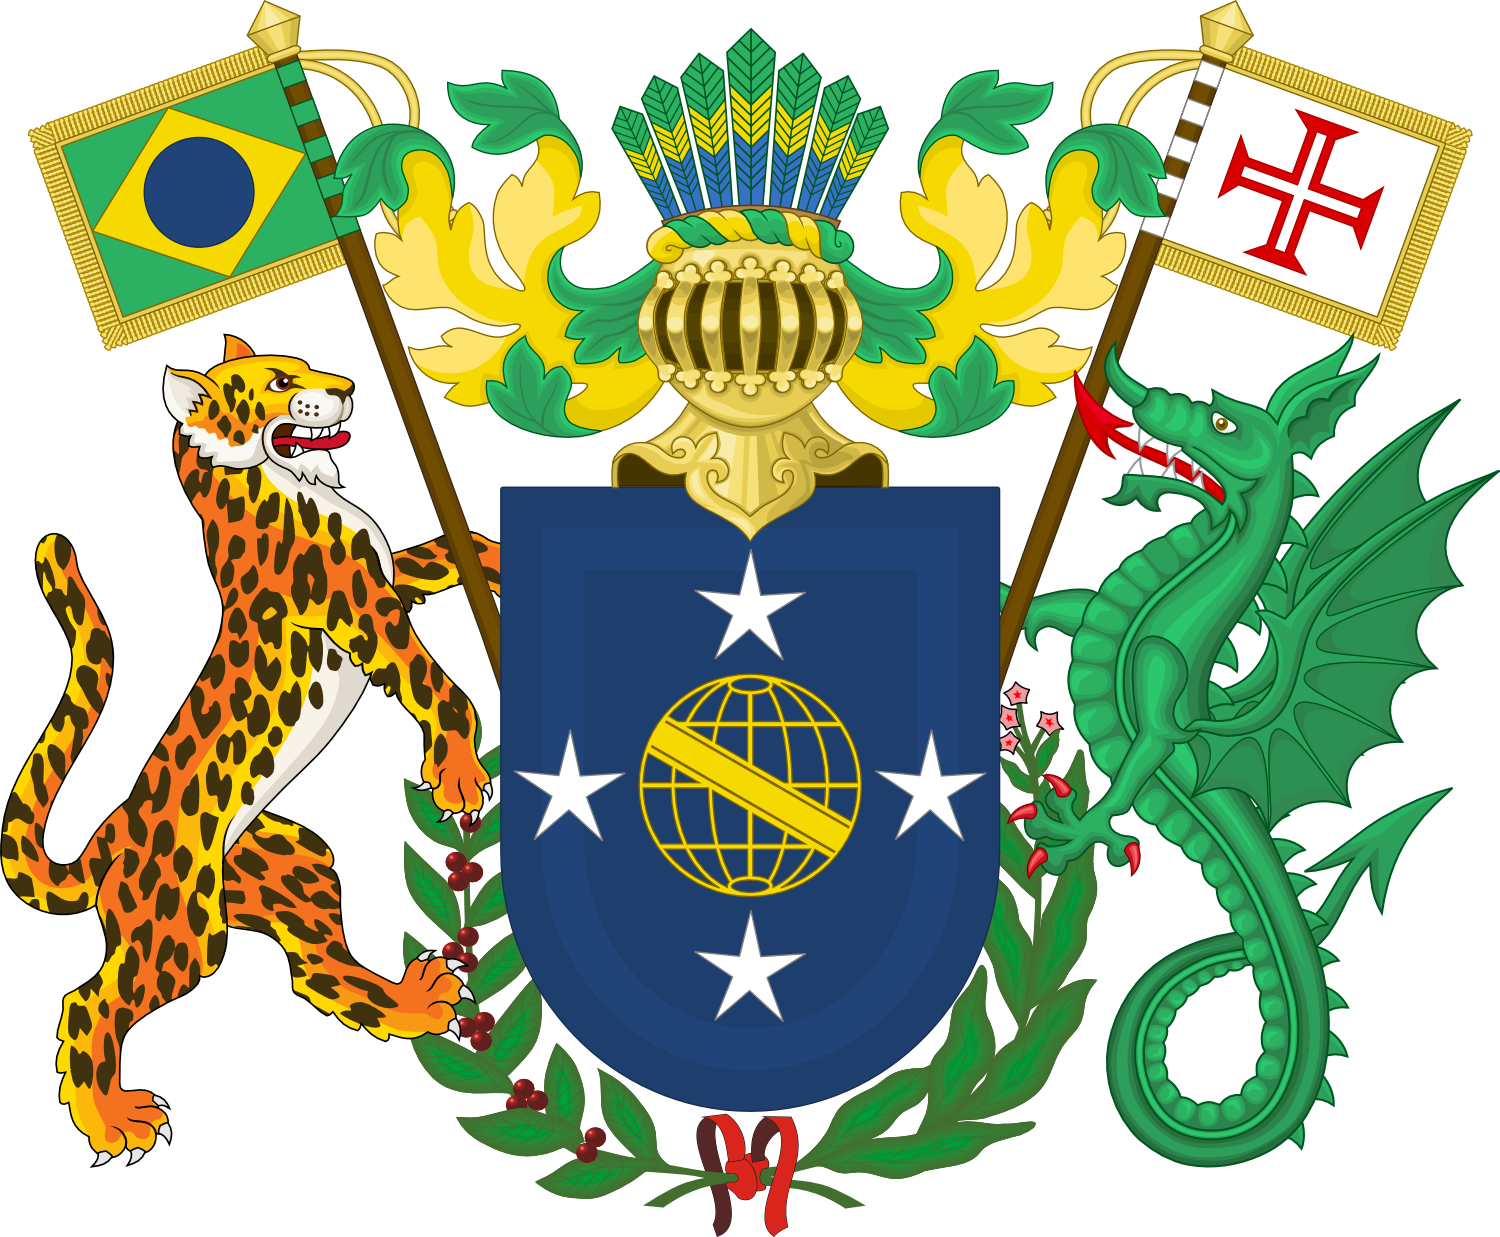 Brazil Coat Of Arms By Leoninia - Computer Misuse Act 1990 (1500x1237)